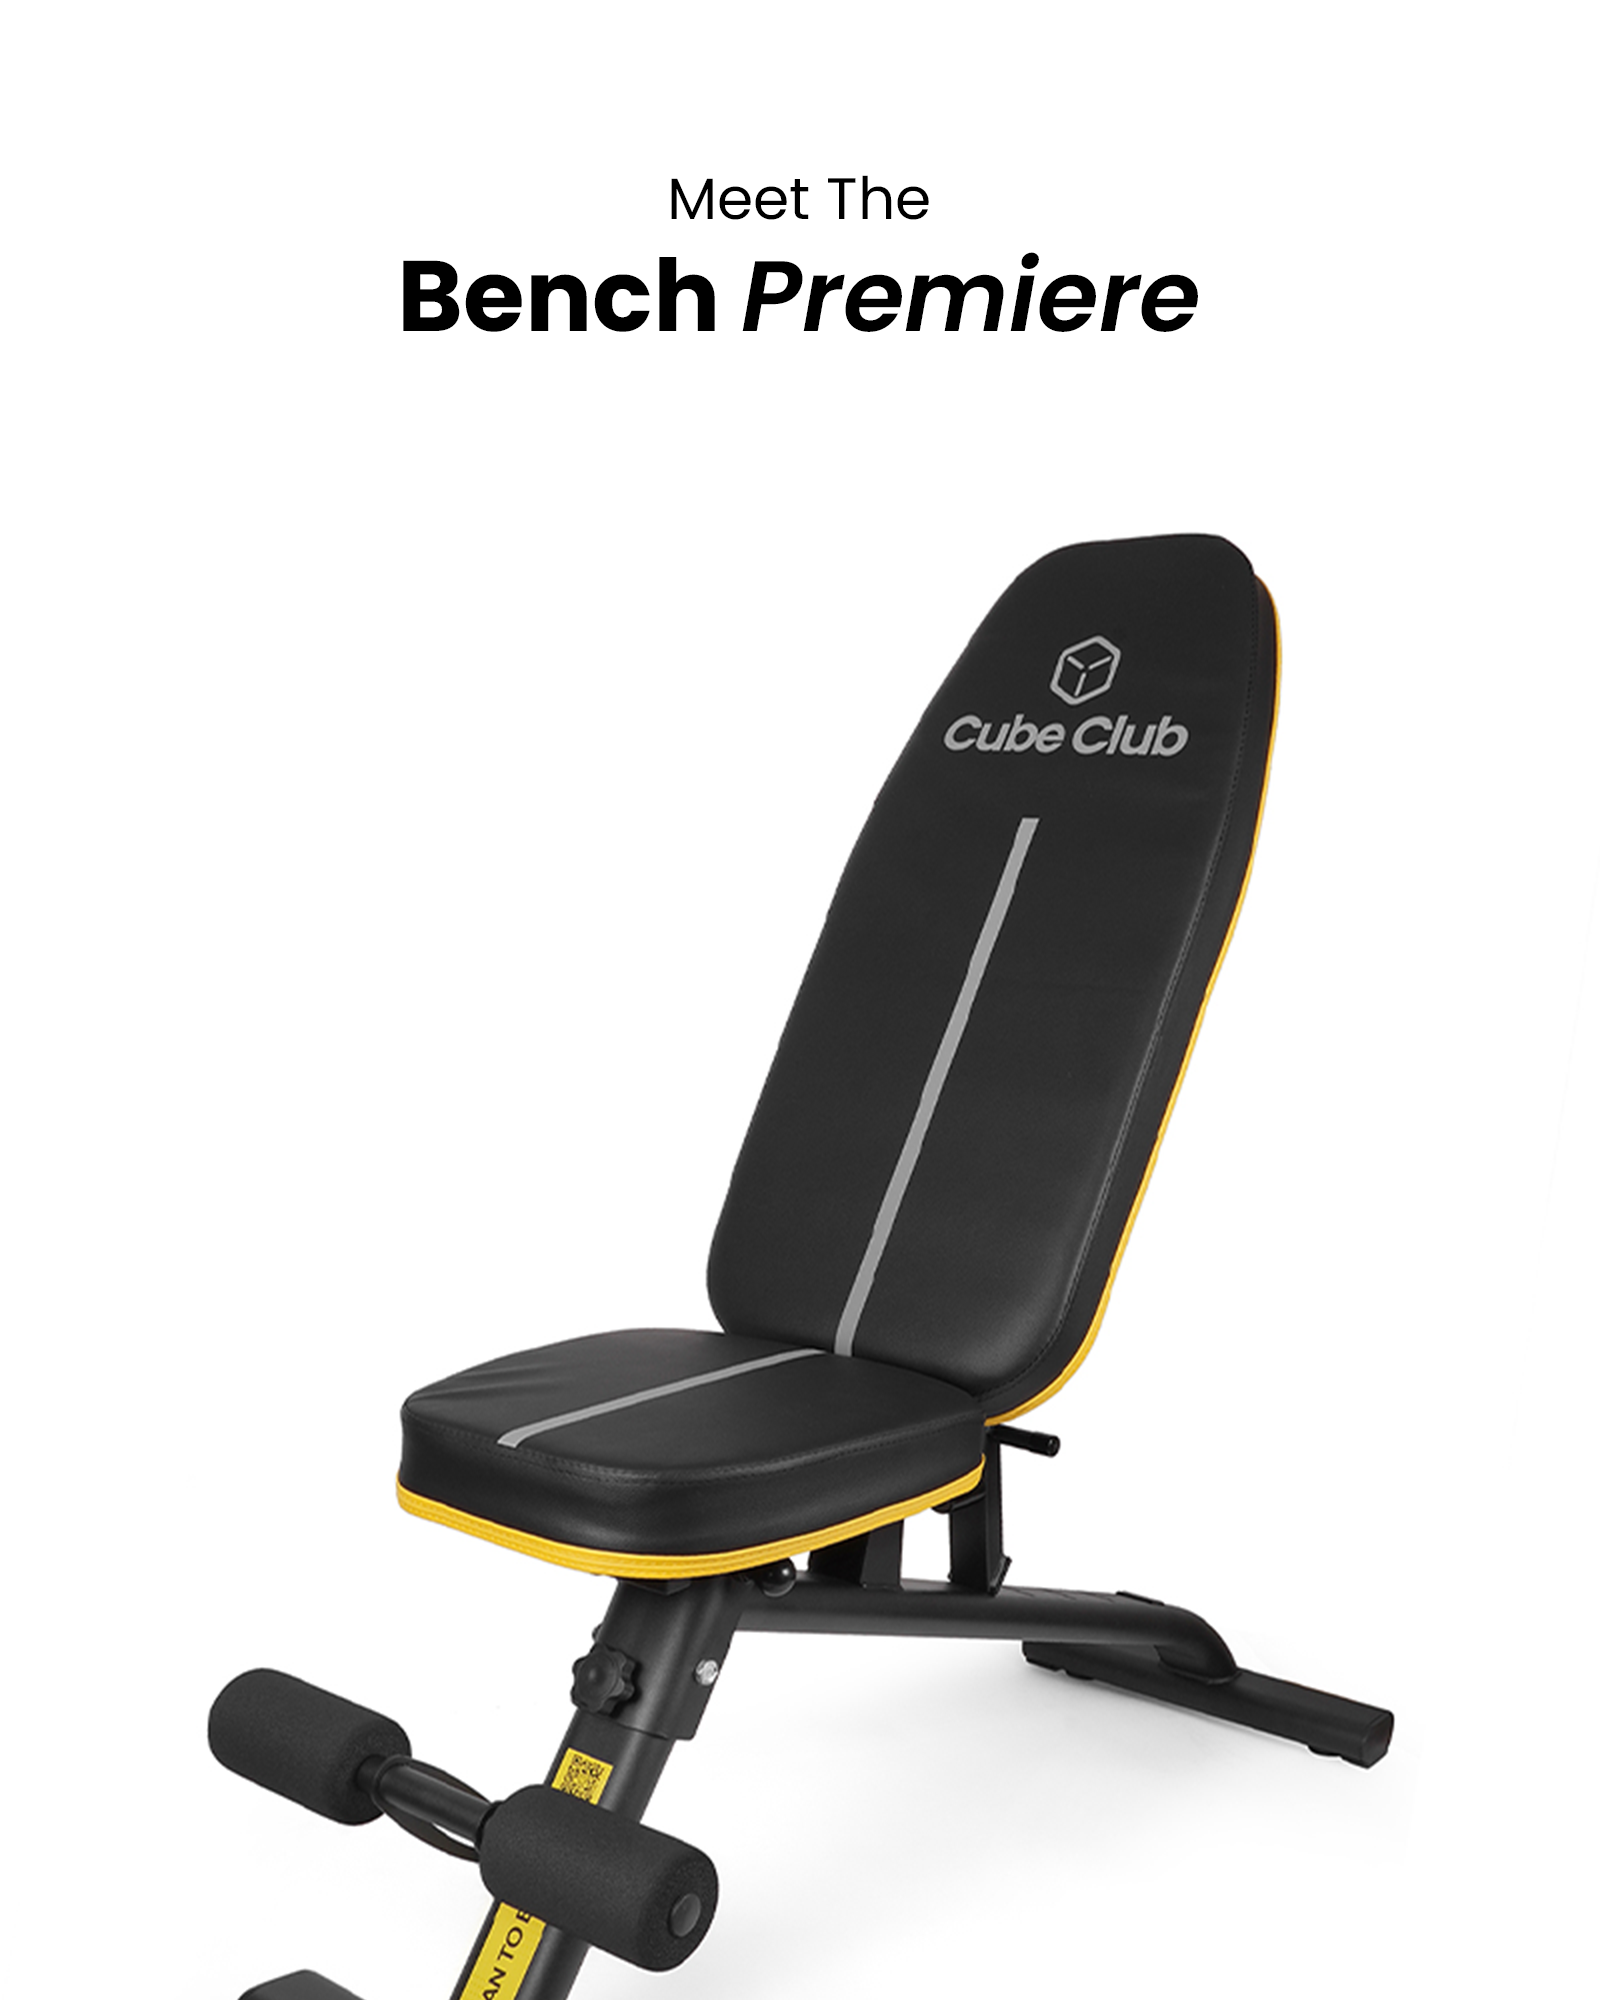 Buy Private Pilates Premium Combo Chair with Free Shipping